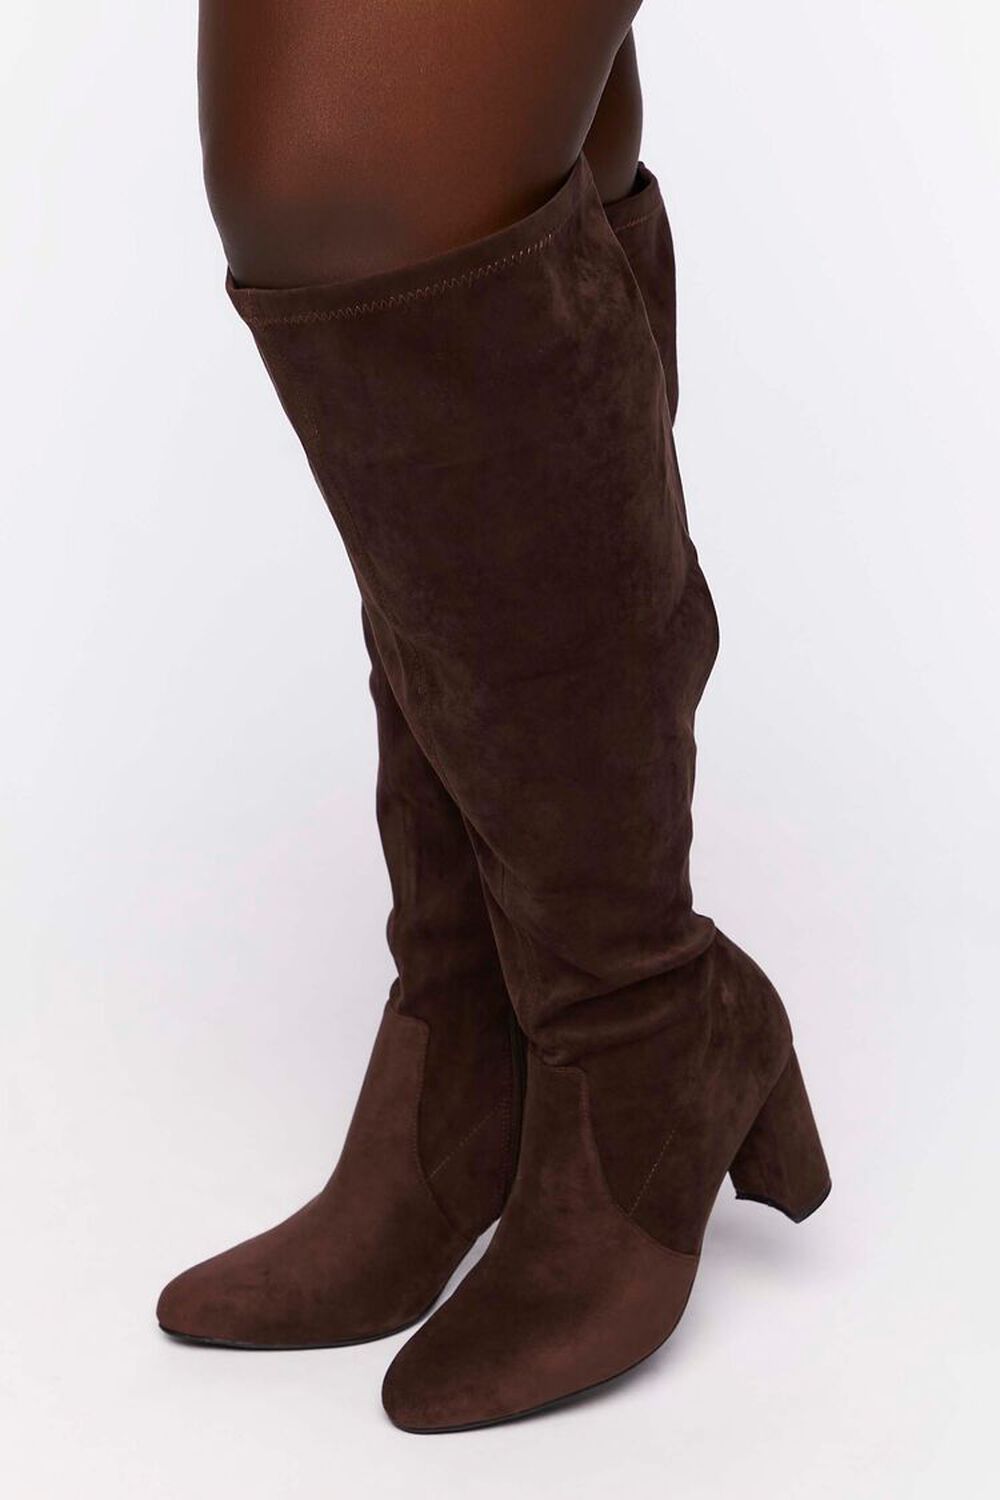 BROWN Faux Suede Over-the-Knee Boots (Wide), image 1